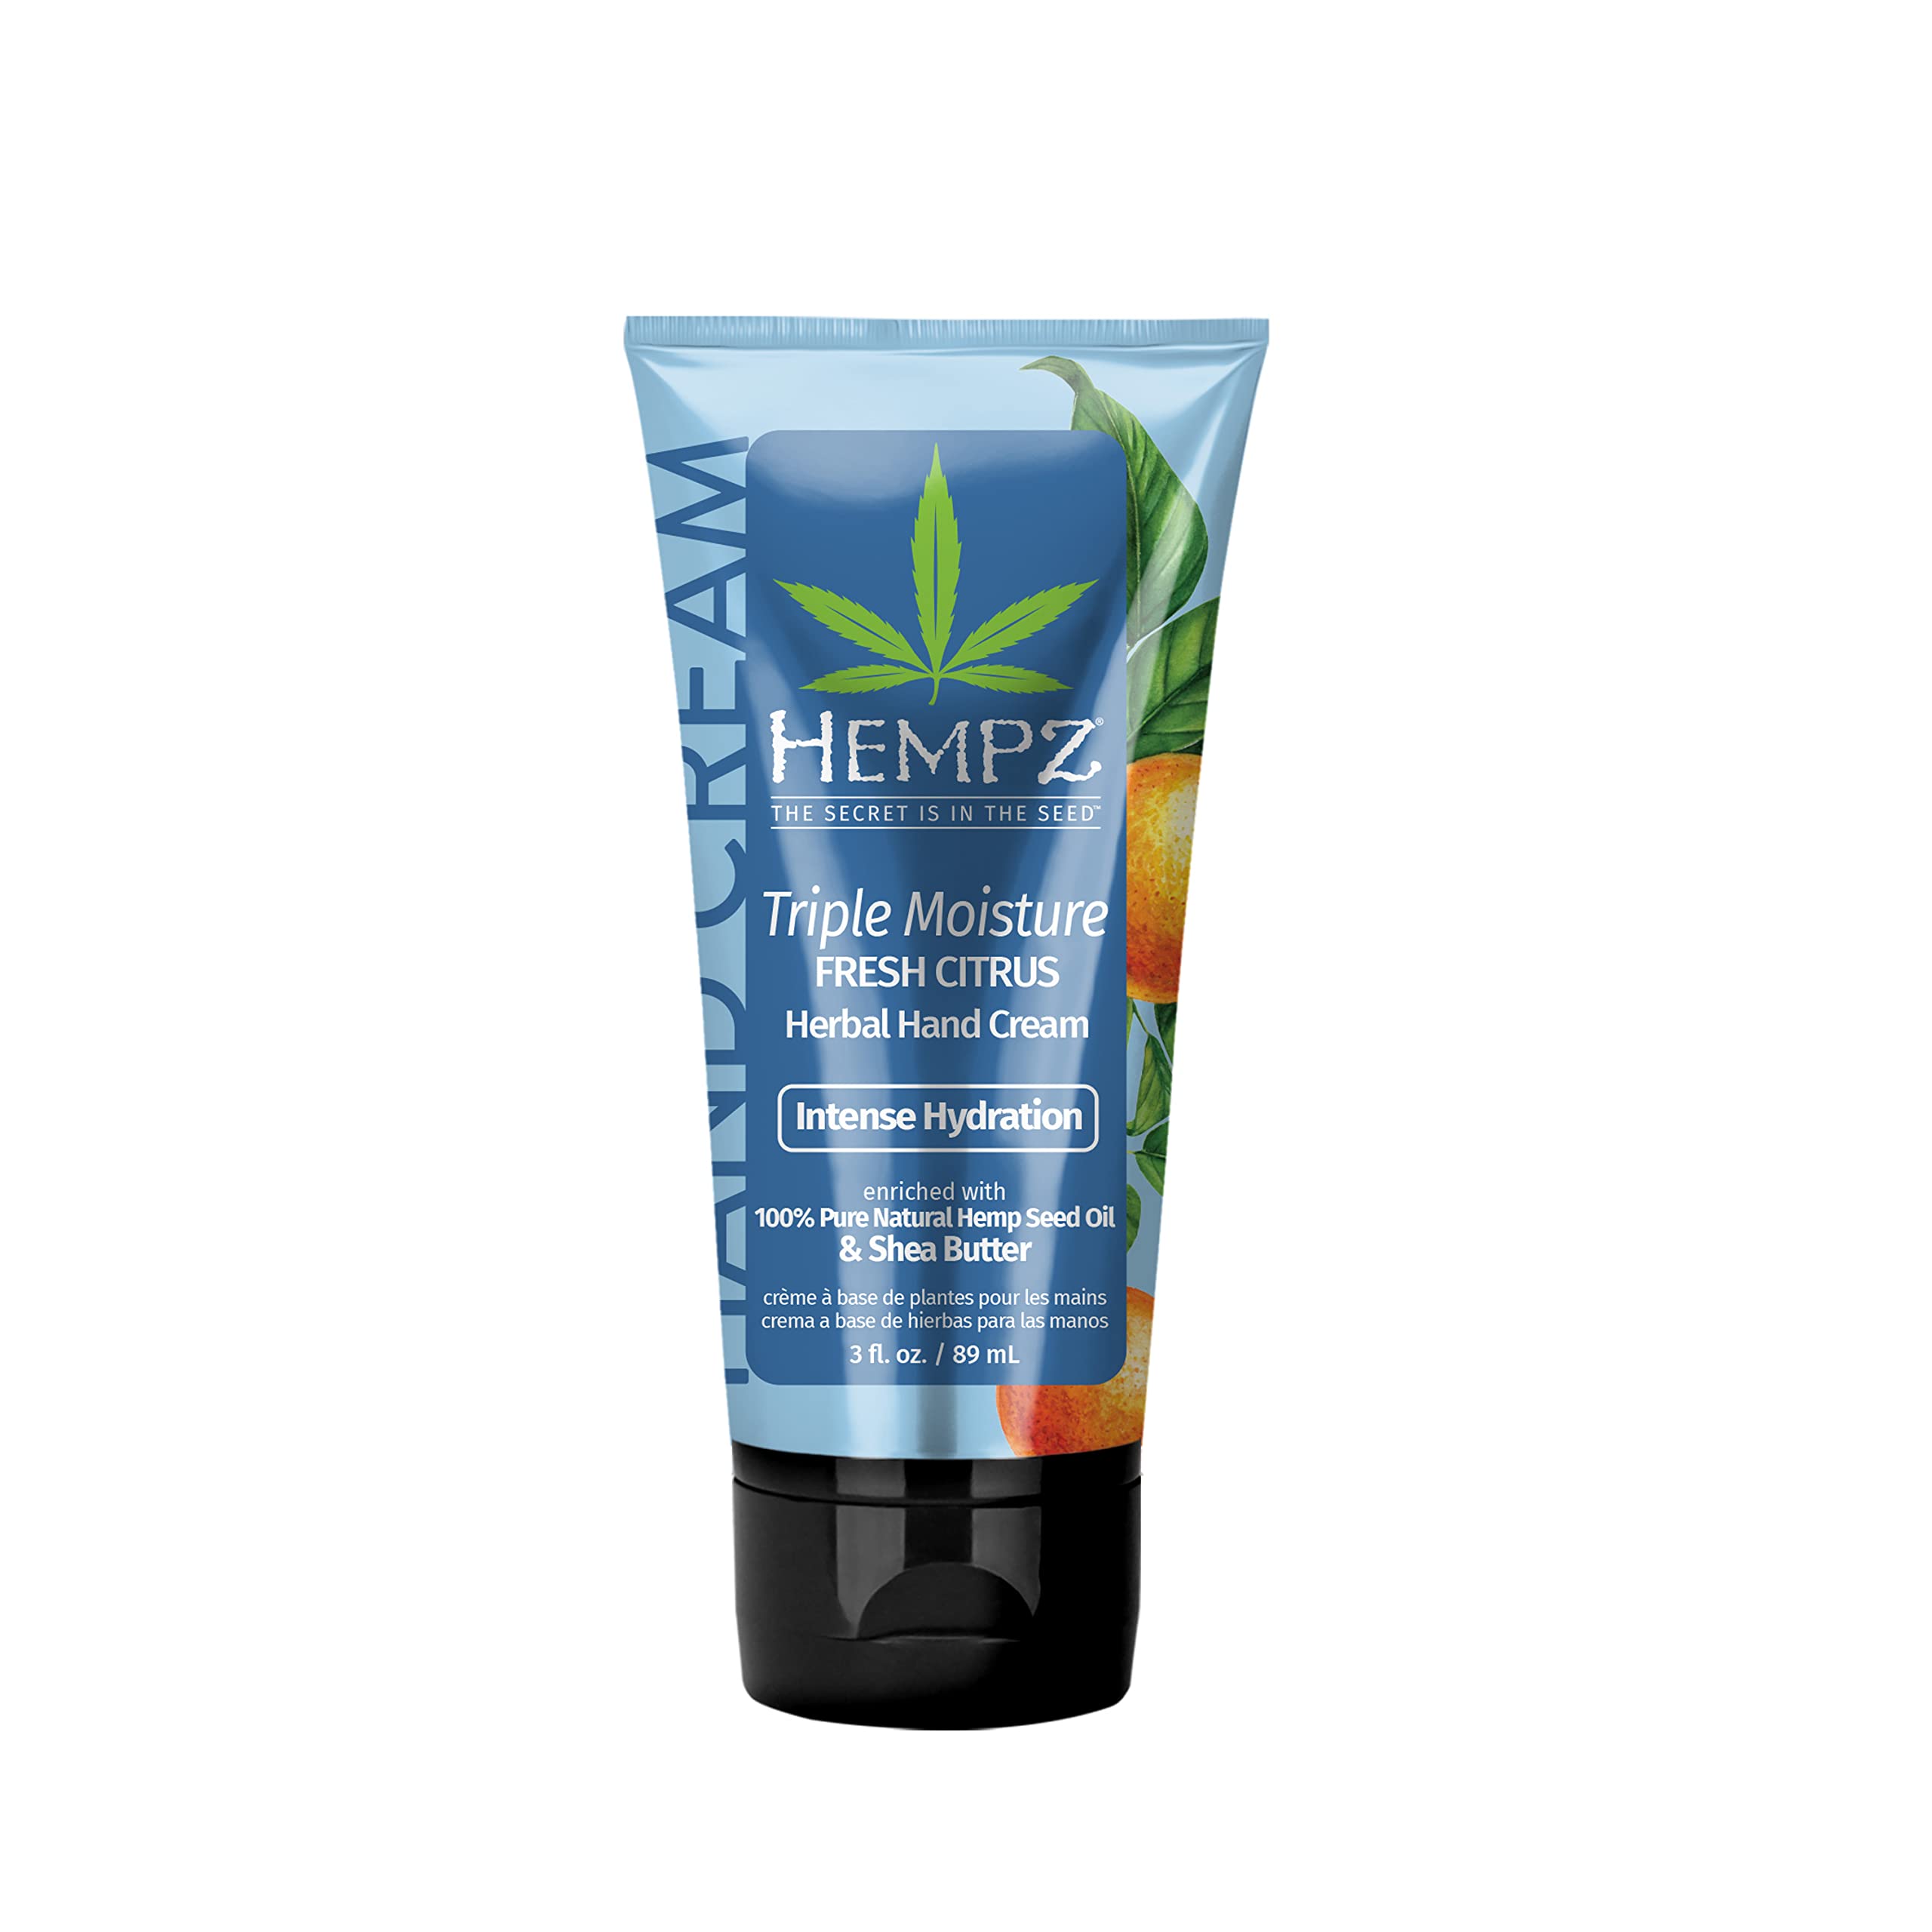 Hempz Daily Moisturizing Triple Moisture Fresh Citrus Hand Cream for Dry, Cracked Hands (3 Oz) – Non-Greasy Crème for Women or Men with Dry or Sensitive Skin